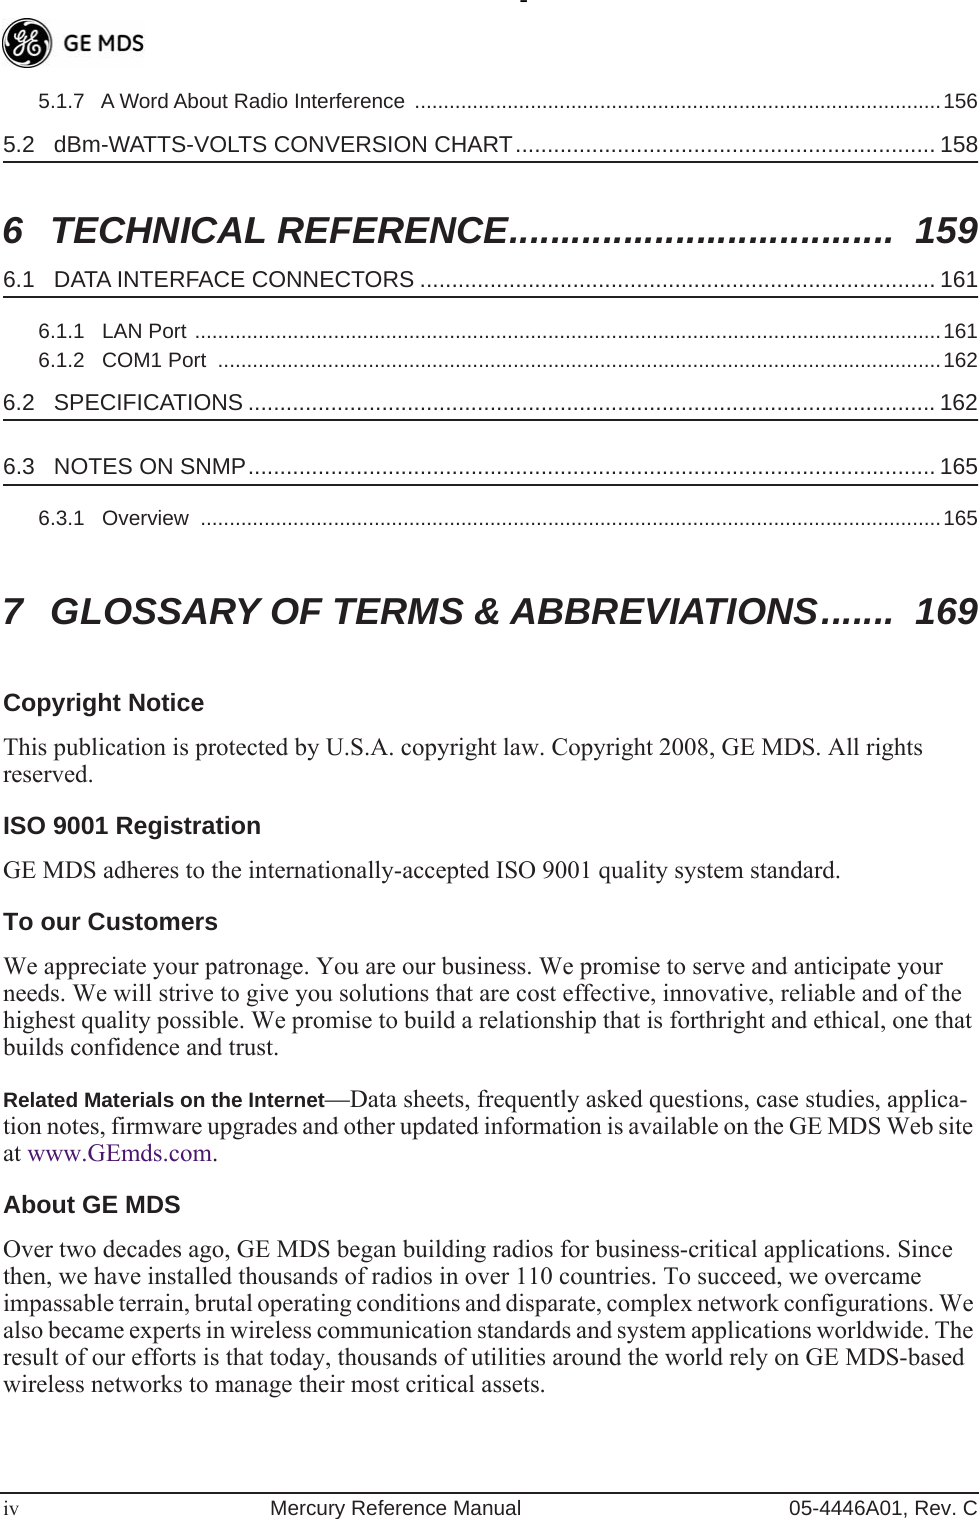  iv Mercury Reference Manual 05-4446A01, Rev. C5.1.7   A Word About Radio Interference  ...........................................................................................156 5.2   dBm-WATTS-VOLTS CONVERSION CHART.................................................................. 158 6 TECHNICAL REFERENCE.....................................  159 6.1   DATA INTERFACE CONNECTORS ................................................................................. 161 6.1.1   LAN Port .................................................................................................................................1616.1.2   COM1 Port  .............................................................................................................................162 6.2   SPECIFICATIONS ............................................................................................................ 162 6.3   NOTES ON SNMP............................................................................................................ 165 6.3.1   Overview  ................................................................................................................................165 7 GLOSSARY OF TERMS &amp; ABBREVIATIONS.......  169 Copyright Notice This publication is protected by U.S.A. copyright law. Copyright 2008, GE MDS. All rights reserved. ISO 9001 Registration GE MDS adheres to the internationally-accepted ISO 9001 quality system standard. To our Customers We appreciate your patronage. You are our business. We promise to serve and anticipate your needs. We will strive to give you solutions that are cost effective, innovative, reliable and of the highest quality possible. We promise to build a relationship that is forthright and ethical, one that builds confidence and trust. Related Materials on the Internet- —Data sheets, frequently asked questions, case studies, applica-tion notes, firmware upgrades and other updated information is available on the GE MDS Web site at www.GEmds.com. About GE MDS Over two decades ago, GE MDS began building radios for business-critical applications. Since then, we have installed thousands of radios in over 110 countries. To succeed, we overcame impassable terrain, brutal operating conditions and disparate, complex network configurations. We also became experts in wireless communication standards and system applications worldwide. The result of our efforts is that today, thousands of utilities around the world rely on GE MDS-based wireless networks to manage their most critical assets.